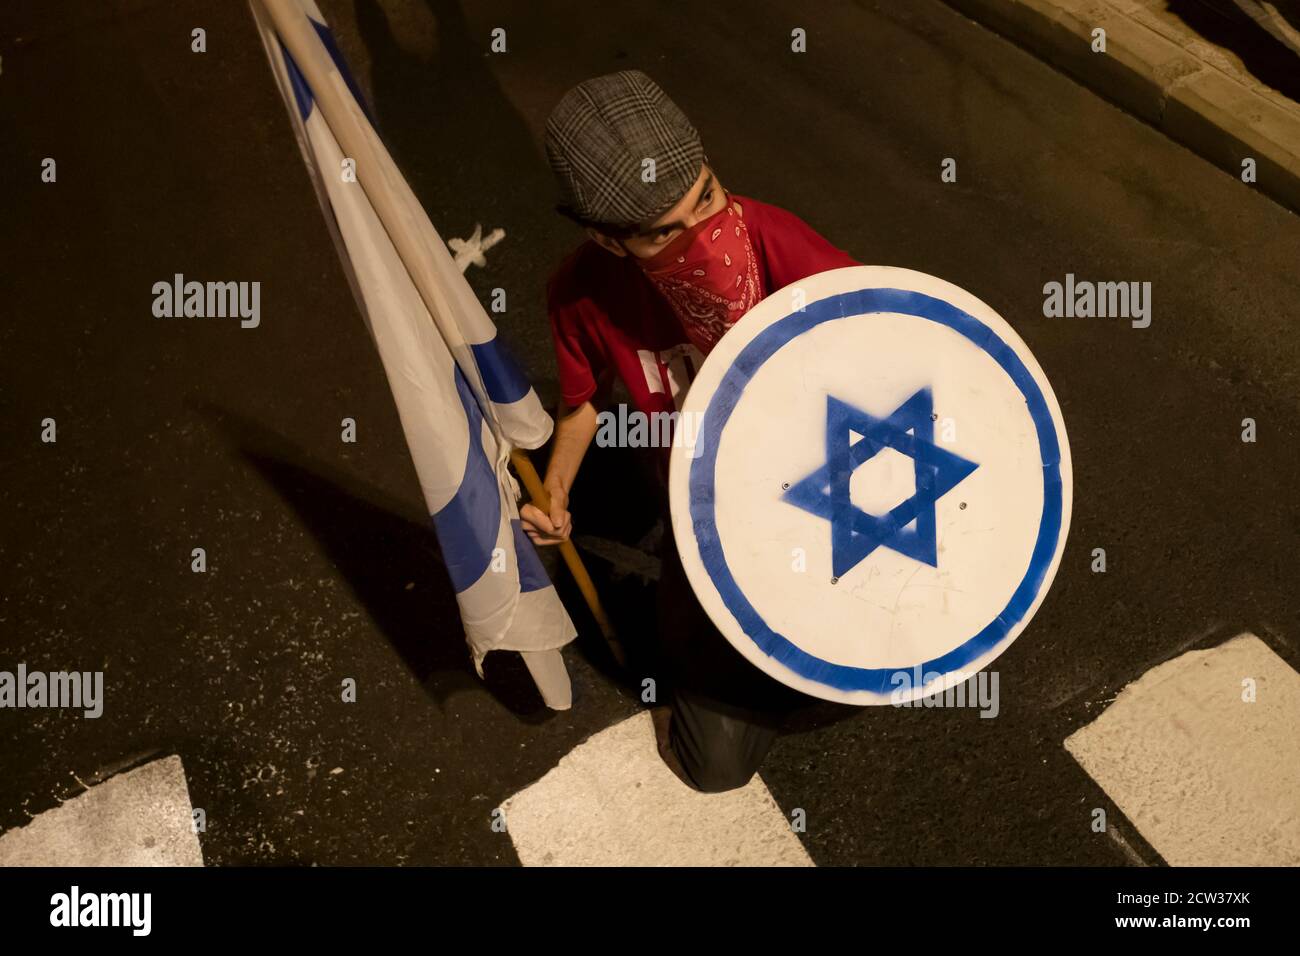 JERUSALEM, ISRAEL - SEPTEMBER 26: A protester holds a shield with the Jewish Star of David during a mass demonstration near prime minister's official residence amid a nationwide lockdown aimed at curbing the coronavirus pandemic on September 26, 2020 in Jerusalem, Israel. A wave of protests has swept Israel in recent months to demand Netanyahu's resignation over his indictment on corruption charges and handling of the coronavirus pandemic, with the largest weekly demonstration taking place every weekend in Jerusalem. Stock Photo